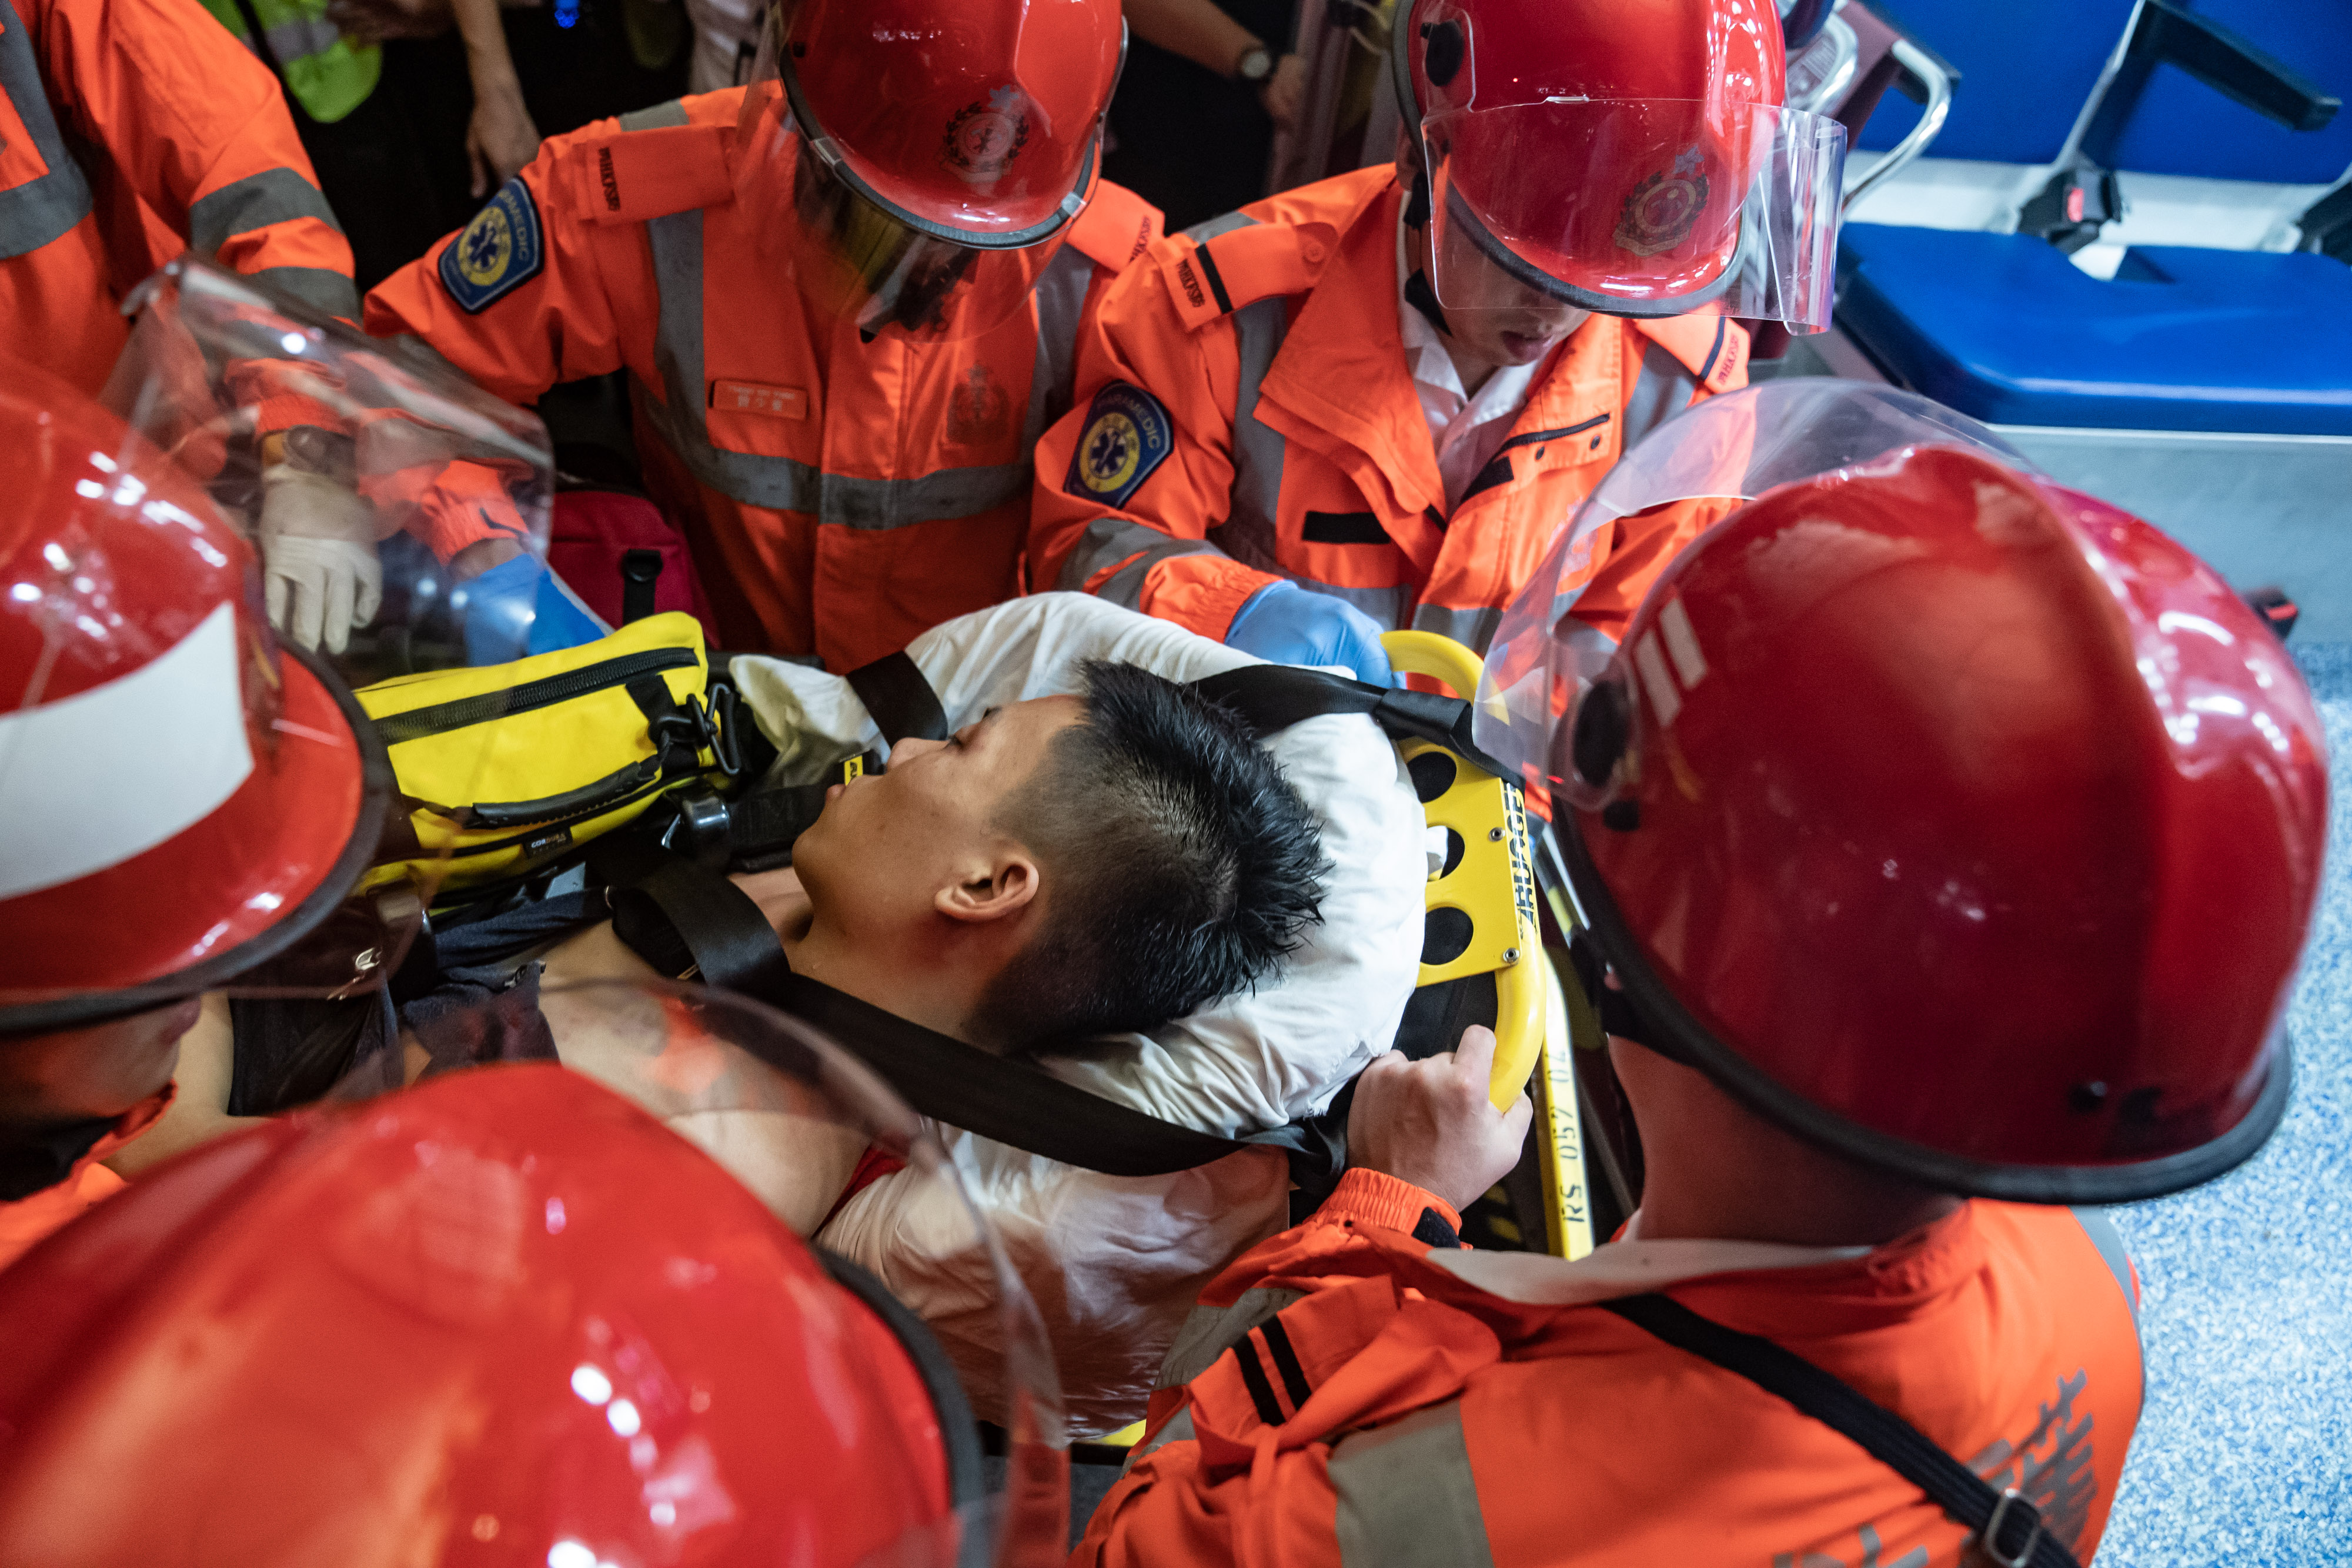 An injured man, who was suspected by protestors of being an undercover police officer, is taken away by paramedics at the Hong Kong International Airport during a demonstration on August 13, 2019.